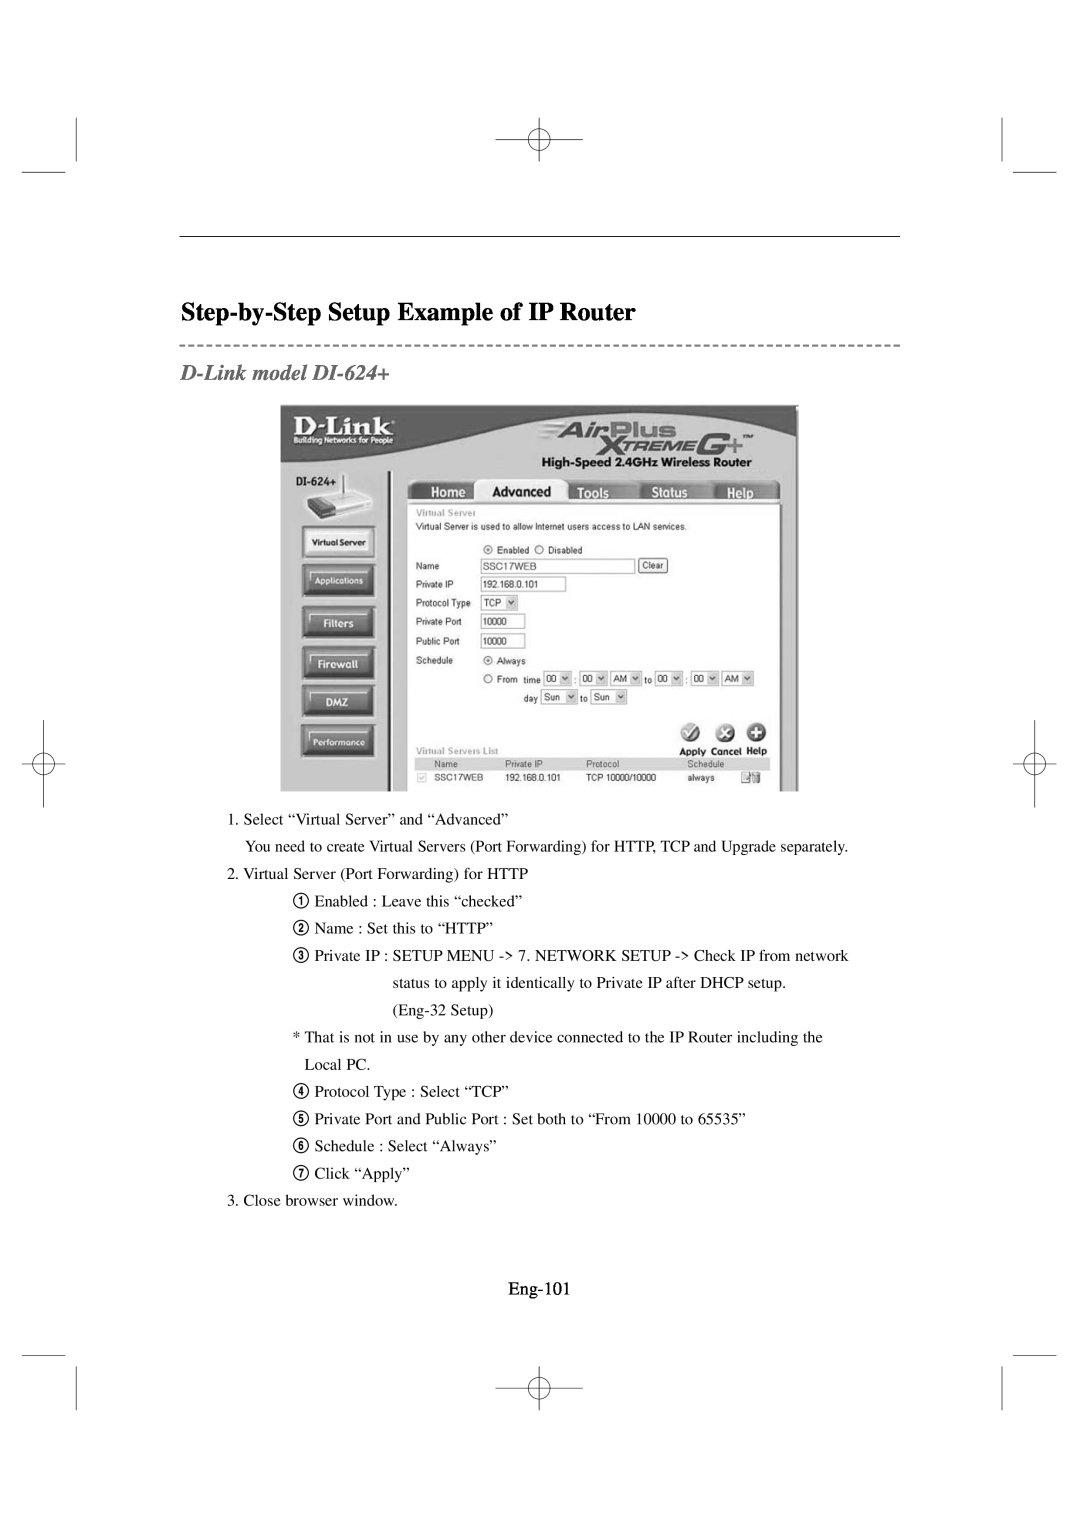 Samsung SSC17WEB manual D-Linkmodel DI-624+, Step-by-StepSetup Example of IP Router, Eng-101 